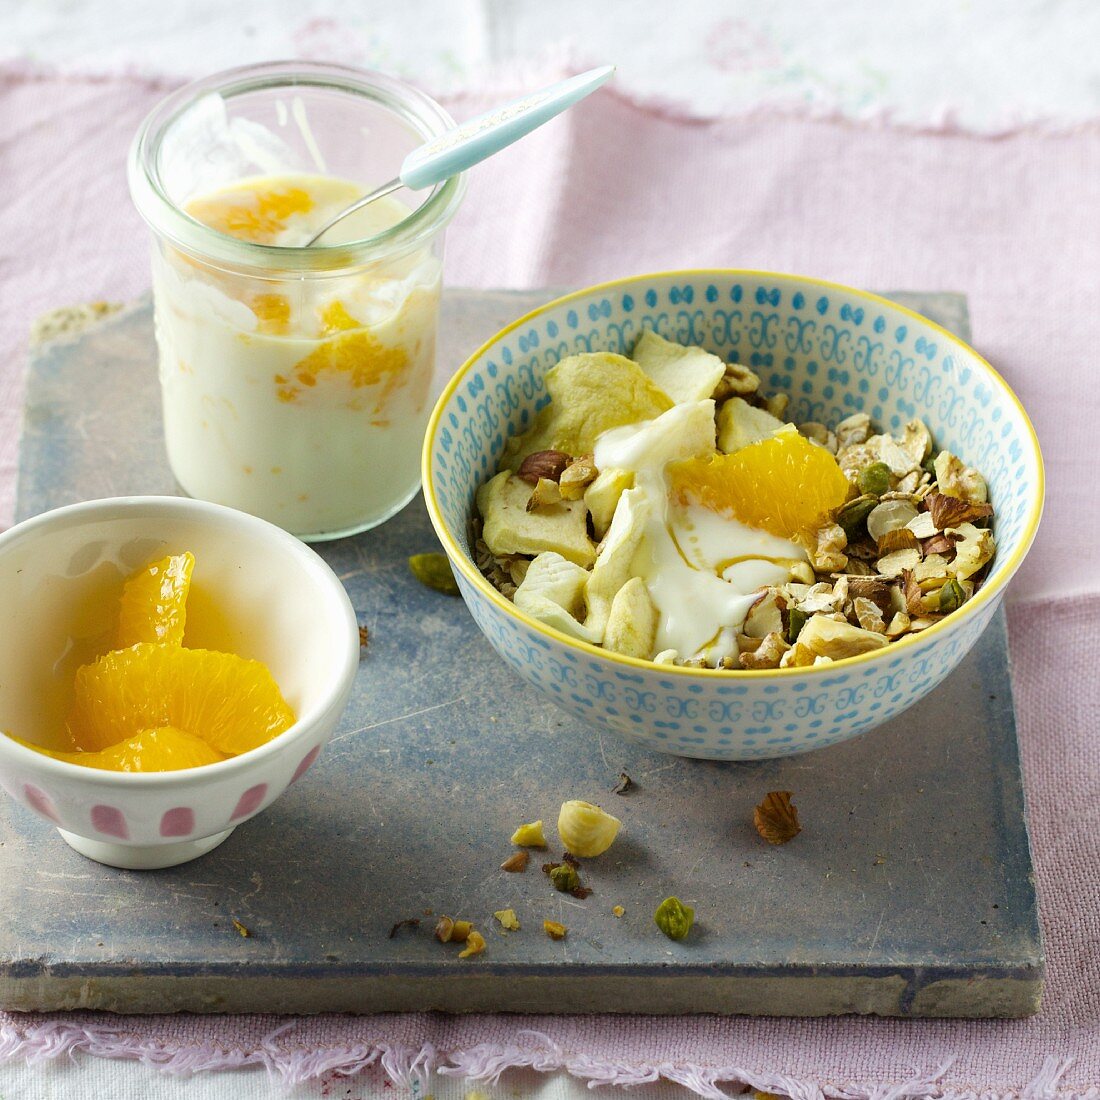 Walnut and pistachio muesli with oranges and soy yoghurt